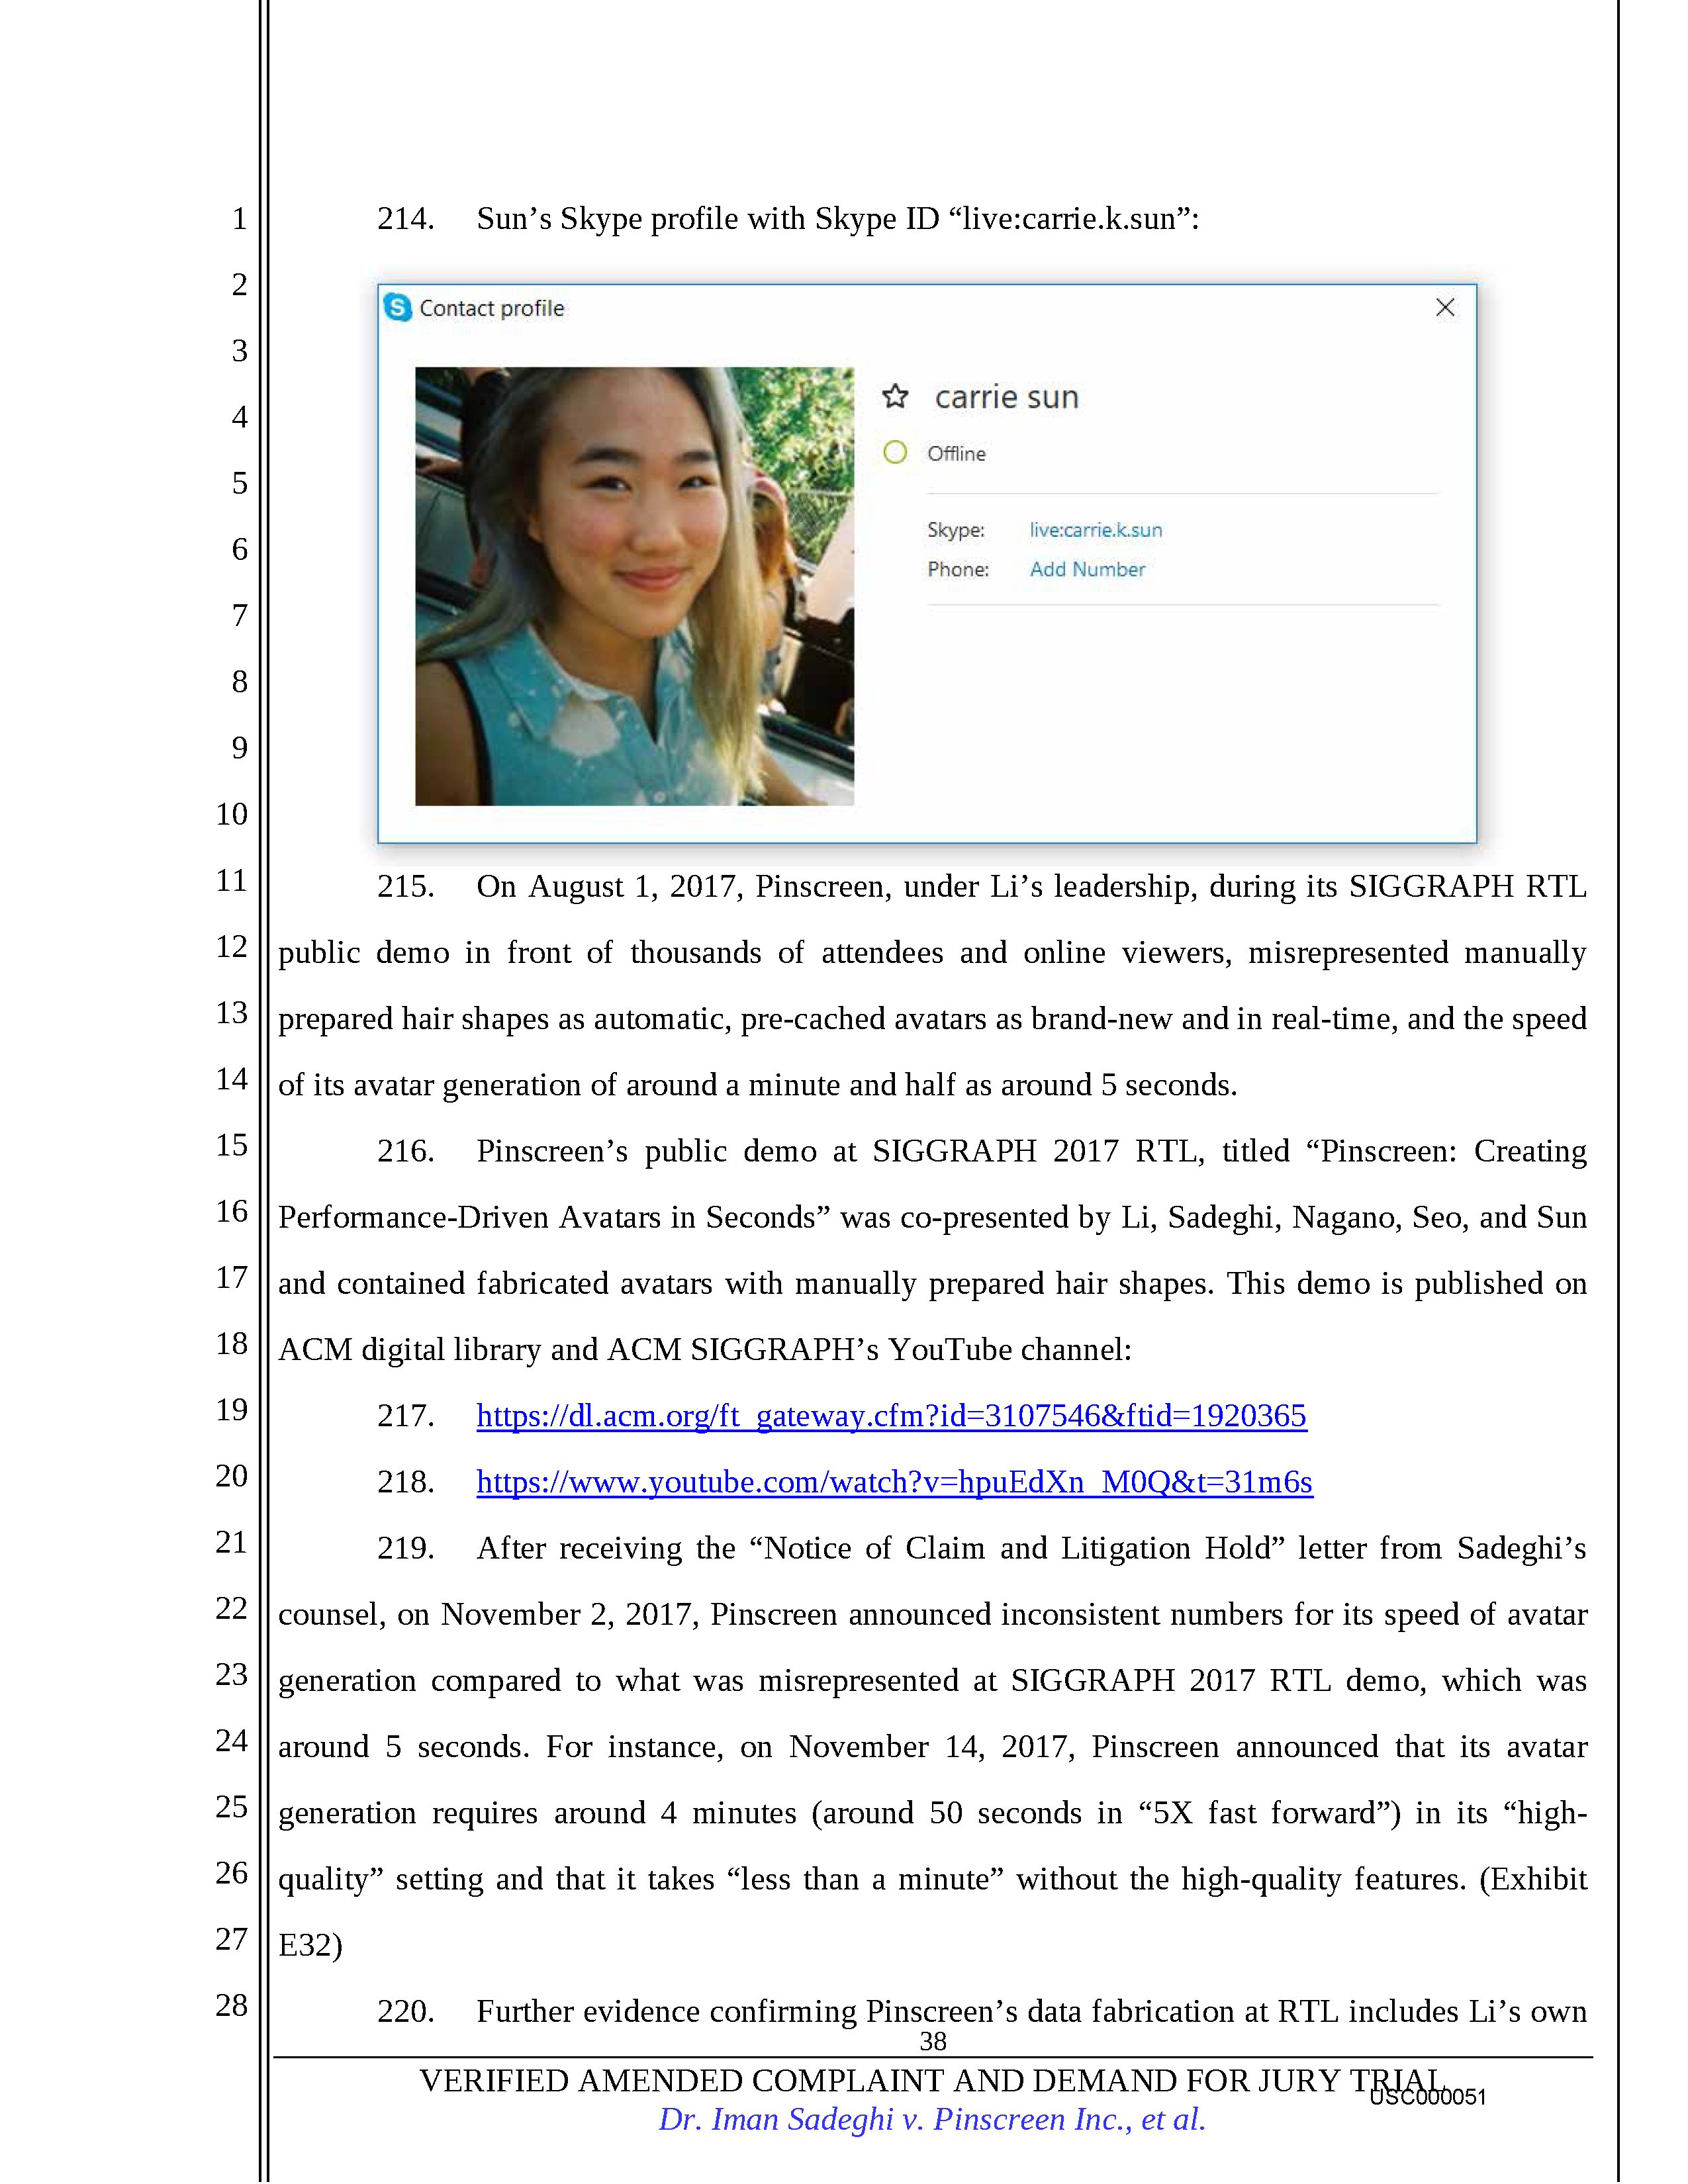 USC's Investigation Report re Hao Li's and Pinscreen's Scientific Misconduct at ACM SIGGRAPH RTL 2017 - Full Report Page 53